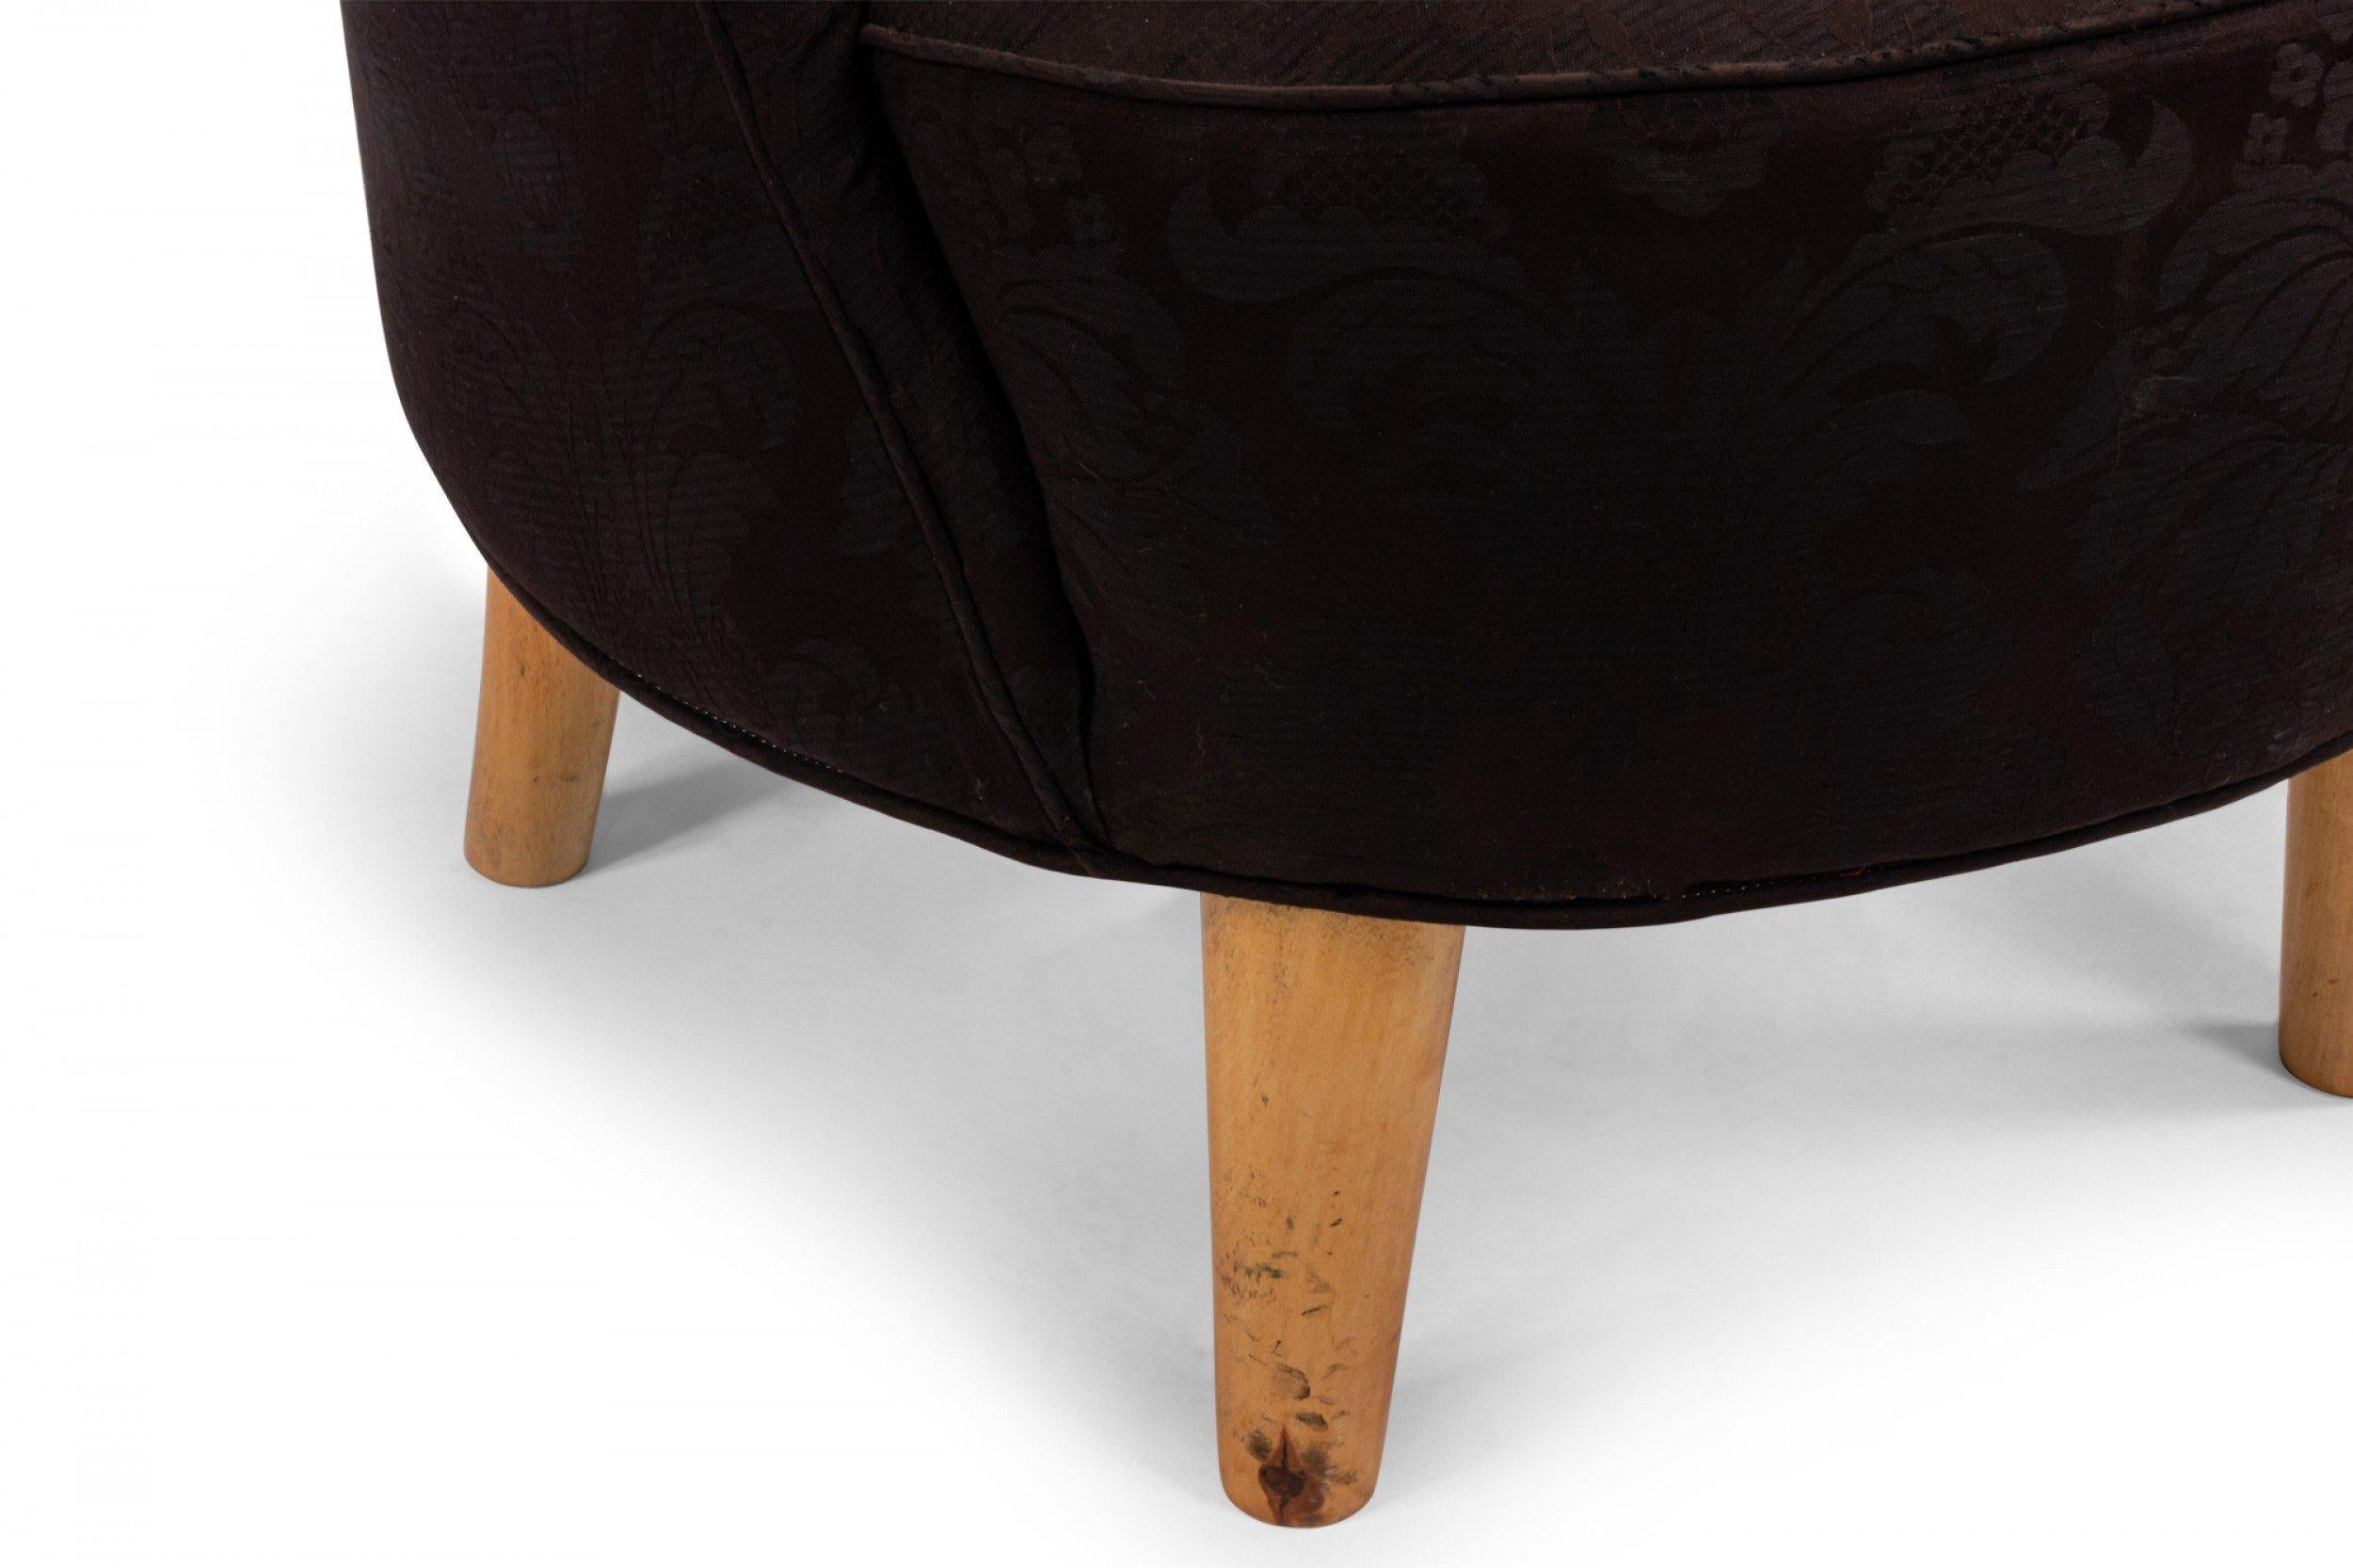 American Art Moderne/contemporary tub chair with black upholstered low round back supported on blond wood tapered round legs.
  